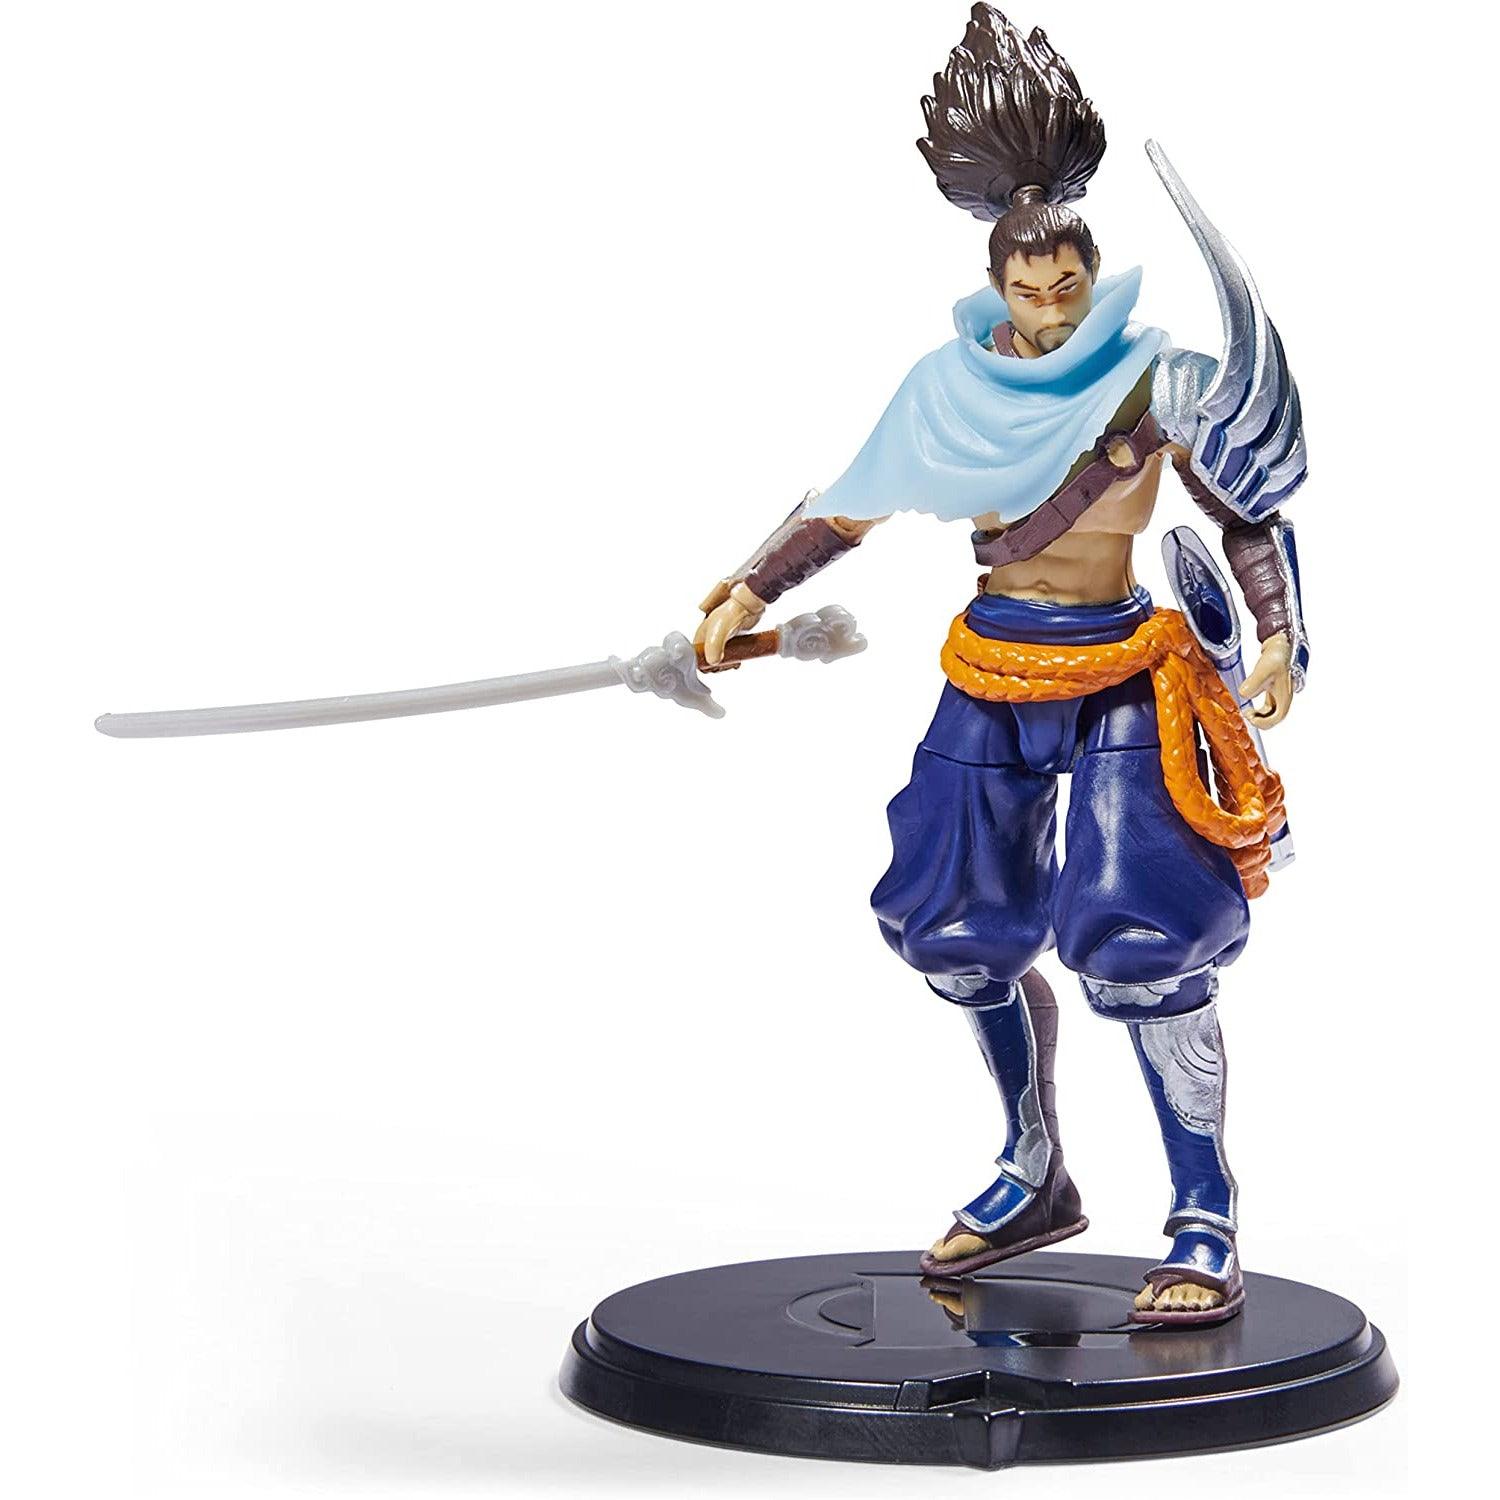 League of Legends, 4-Inch Yasuo Collectible Figure w/ Premium Details and Sword Accessory, The Champion Collection - BumbleToys - 5-7 Years, Boys, Characters, collectible, collectors, EXO, Figures, LEAGUE OF LEGENDS, zed